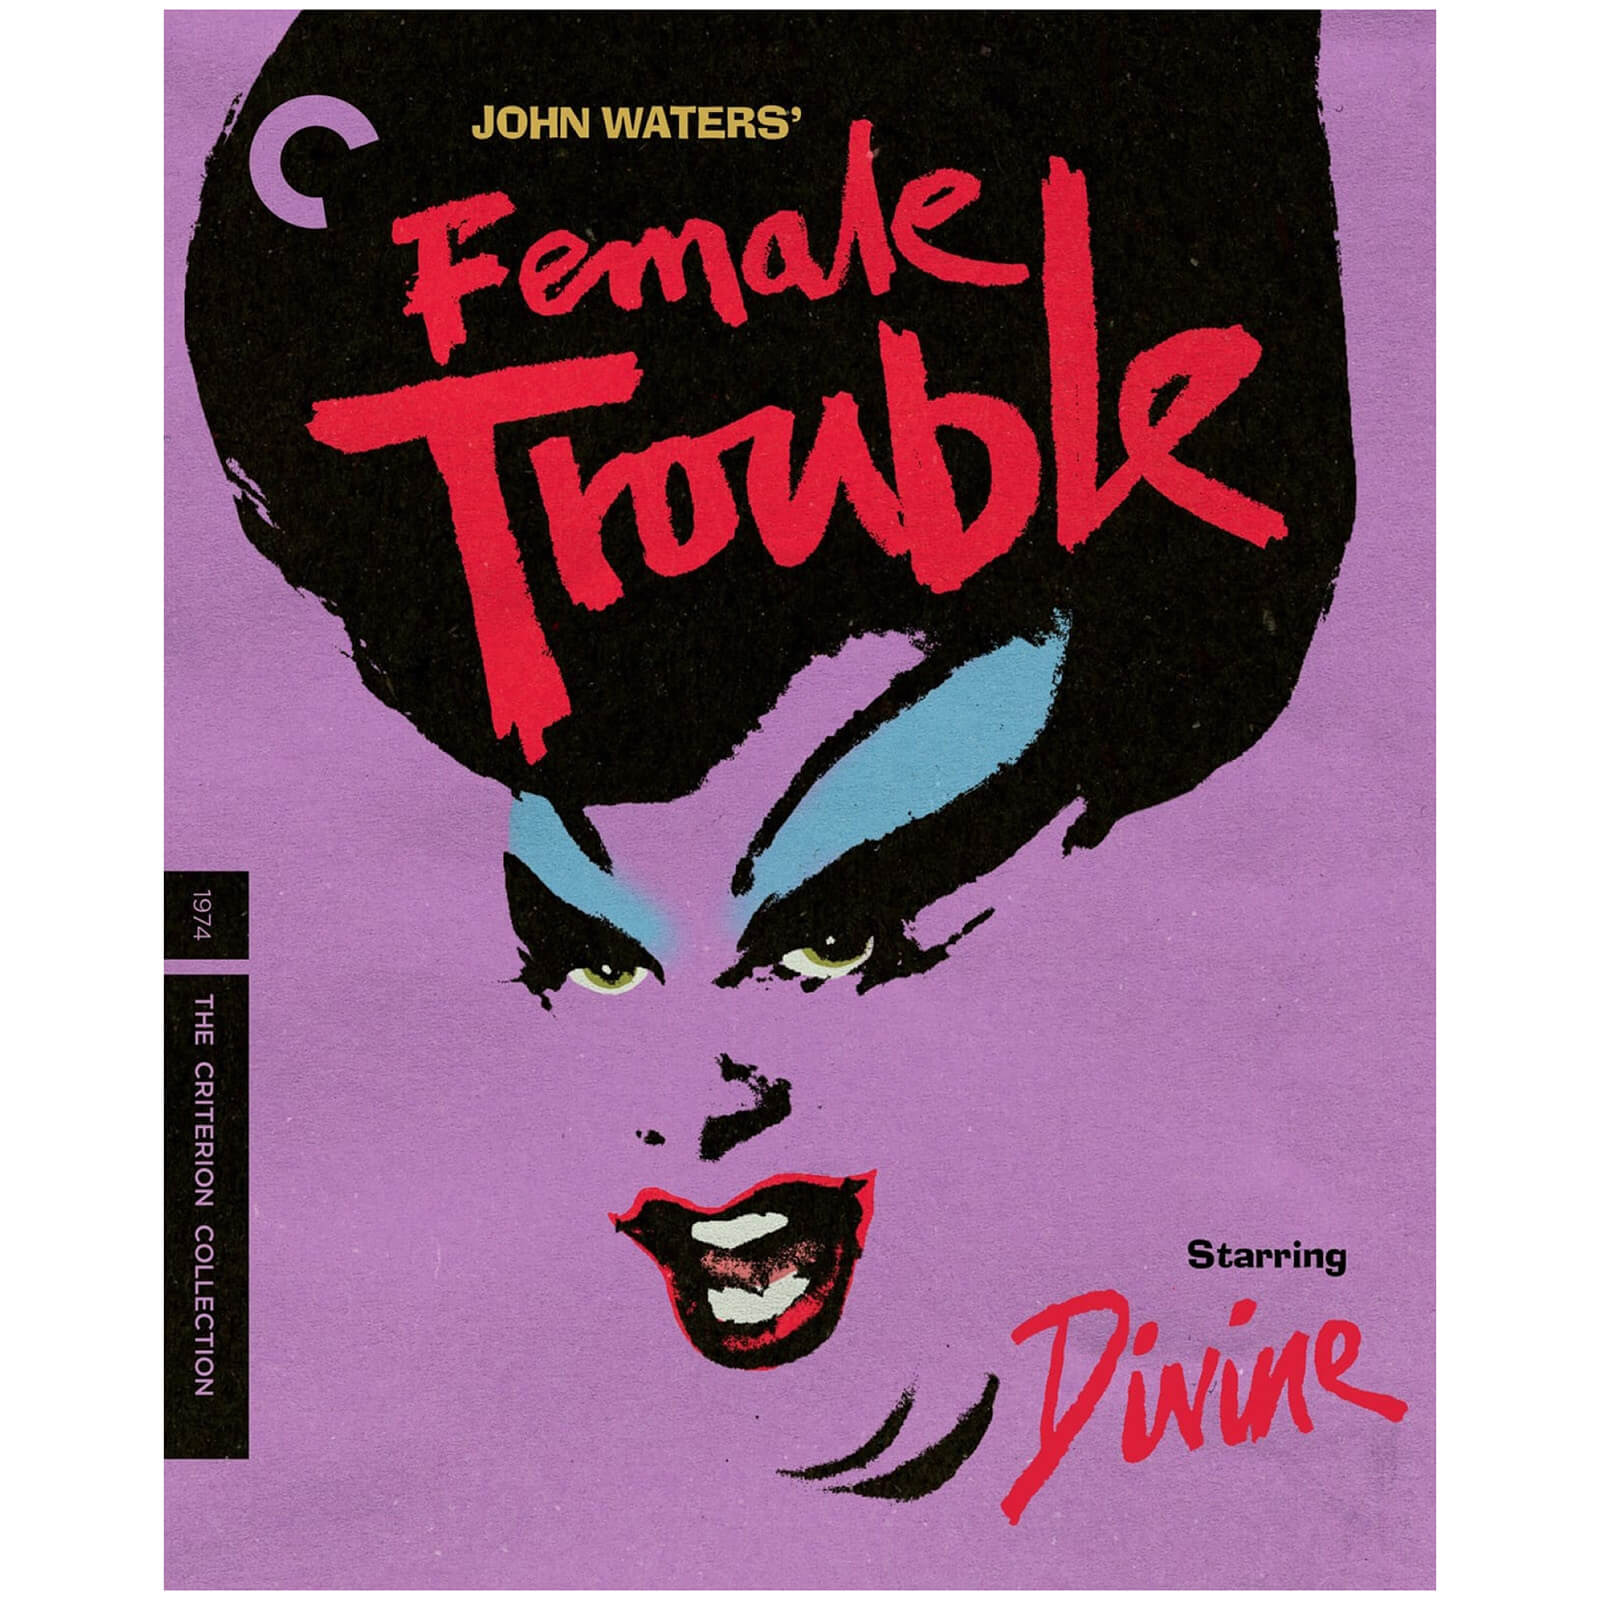 Female Trouble - The Criterion Collection (US Import) von CRITERION COLLECTION